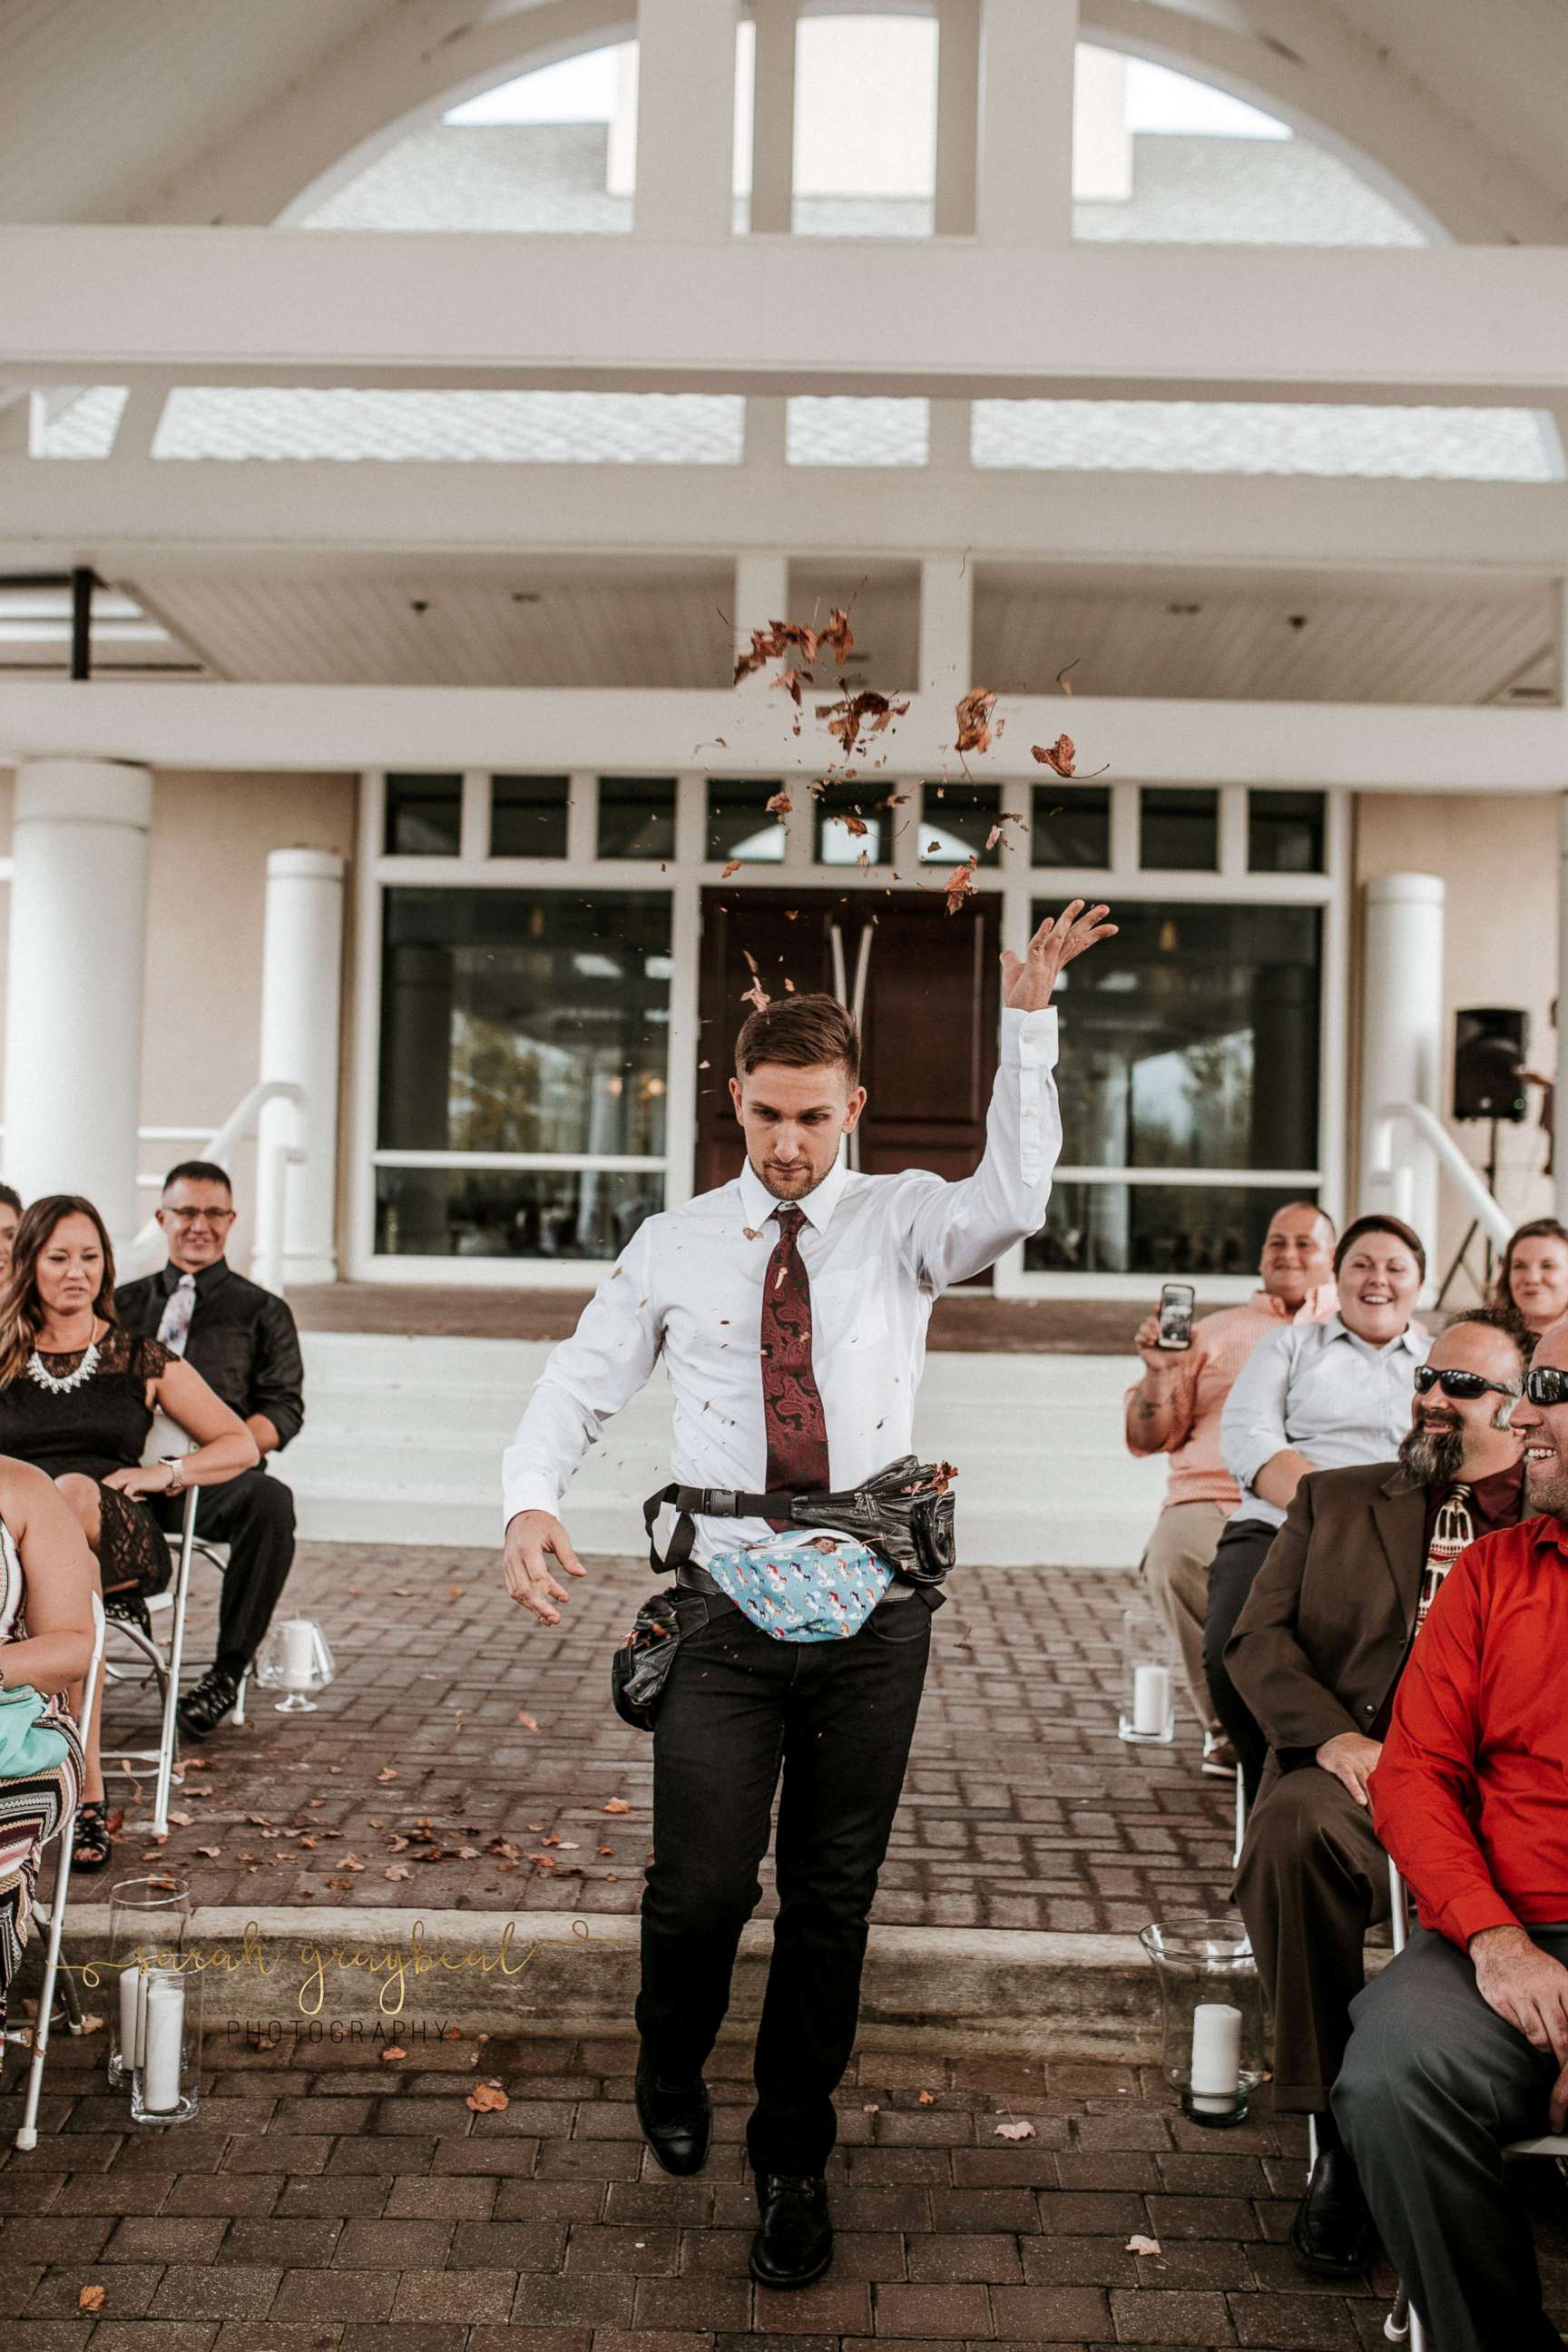 PHOTO: Jake Clark of Dayton, Ohio, served as his friends' flower man, throwing fall foliage out of fanny packs on Oct. 7.